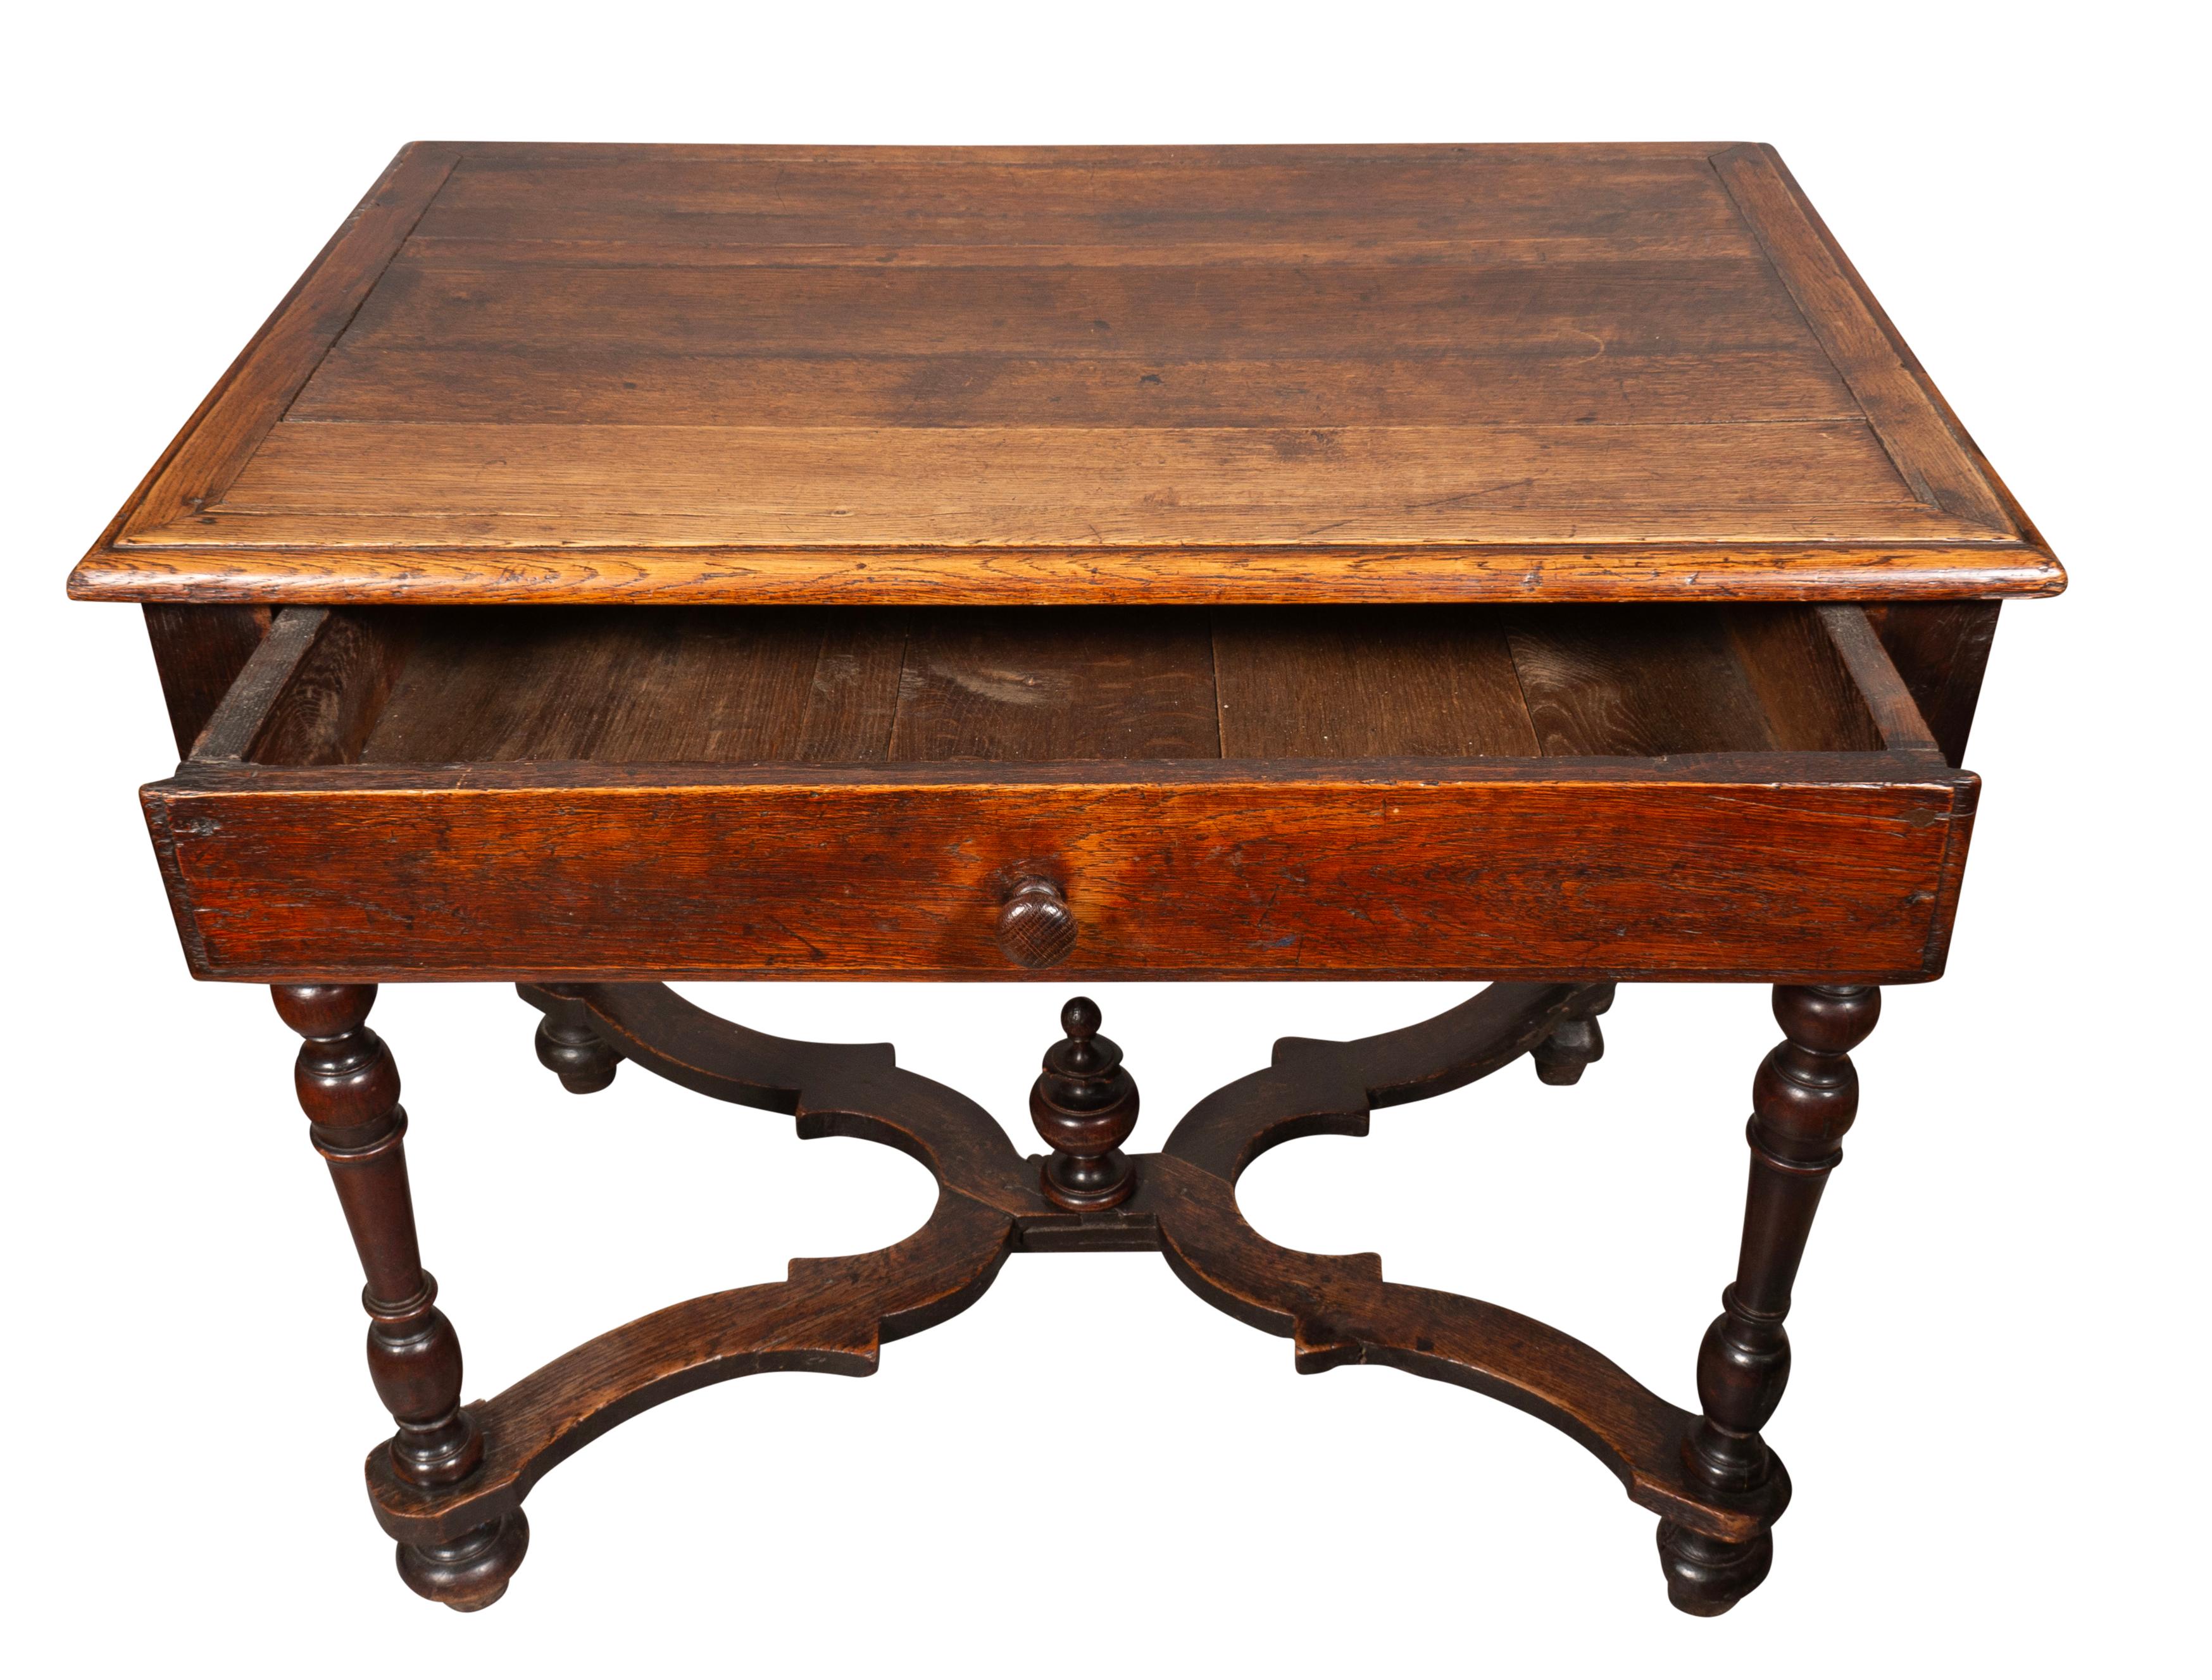 Rectangular top over a single drawer with scalloped apron. Raised on turned legs joined by flat X form stretchers with central finial.